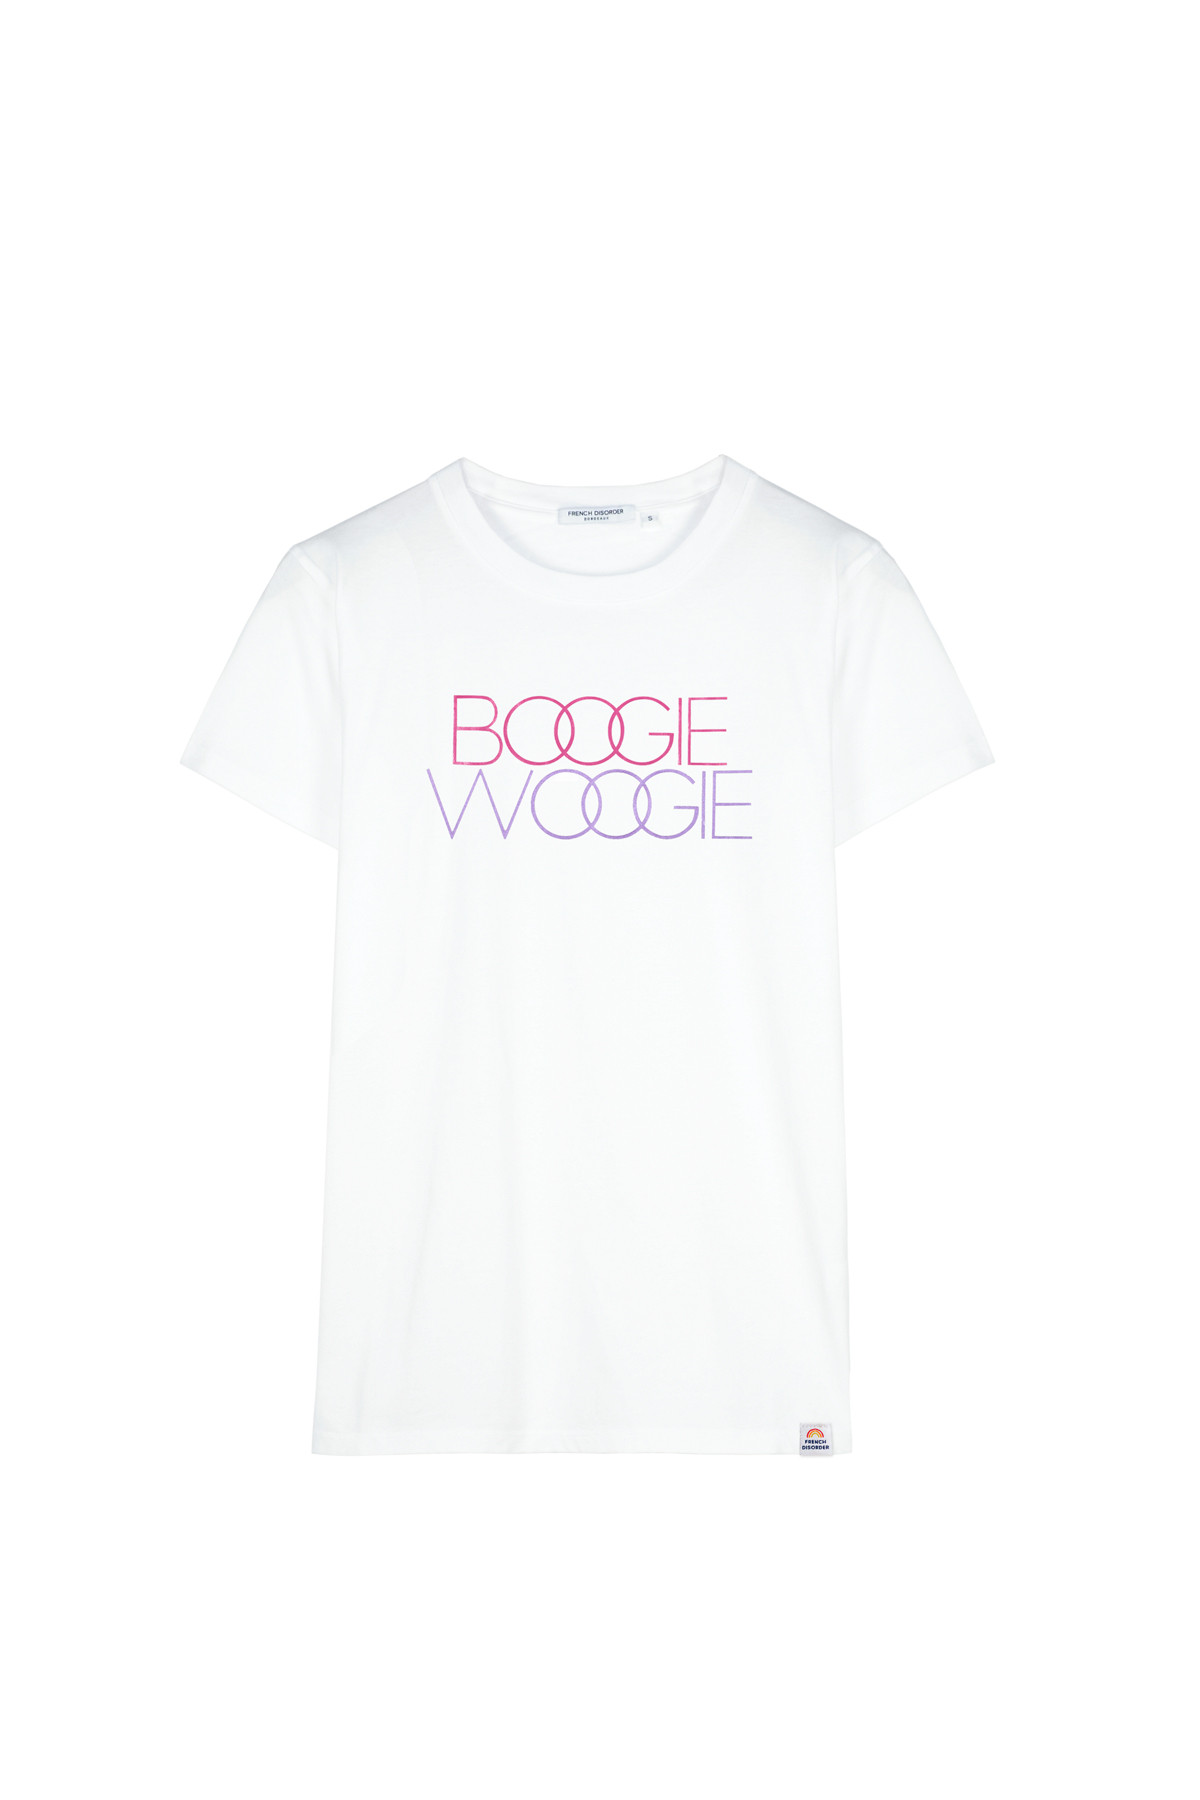 Photo de T-SHIRTS COL ROND Tshirt BOOGIE WOOGIE chez French Disorder